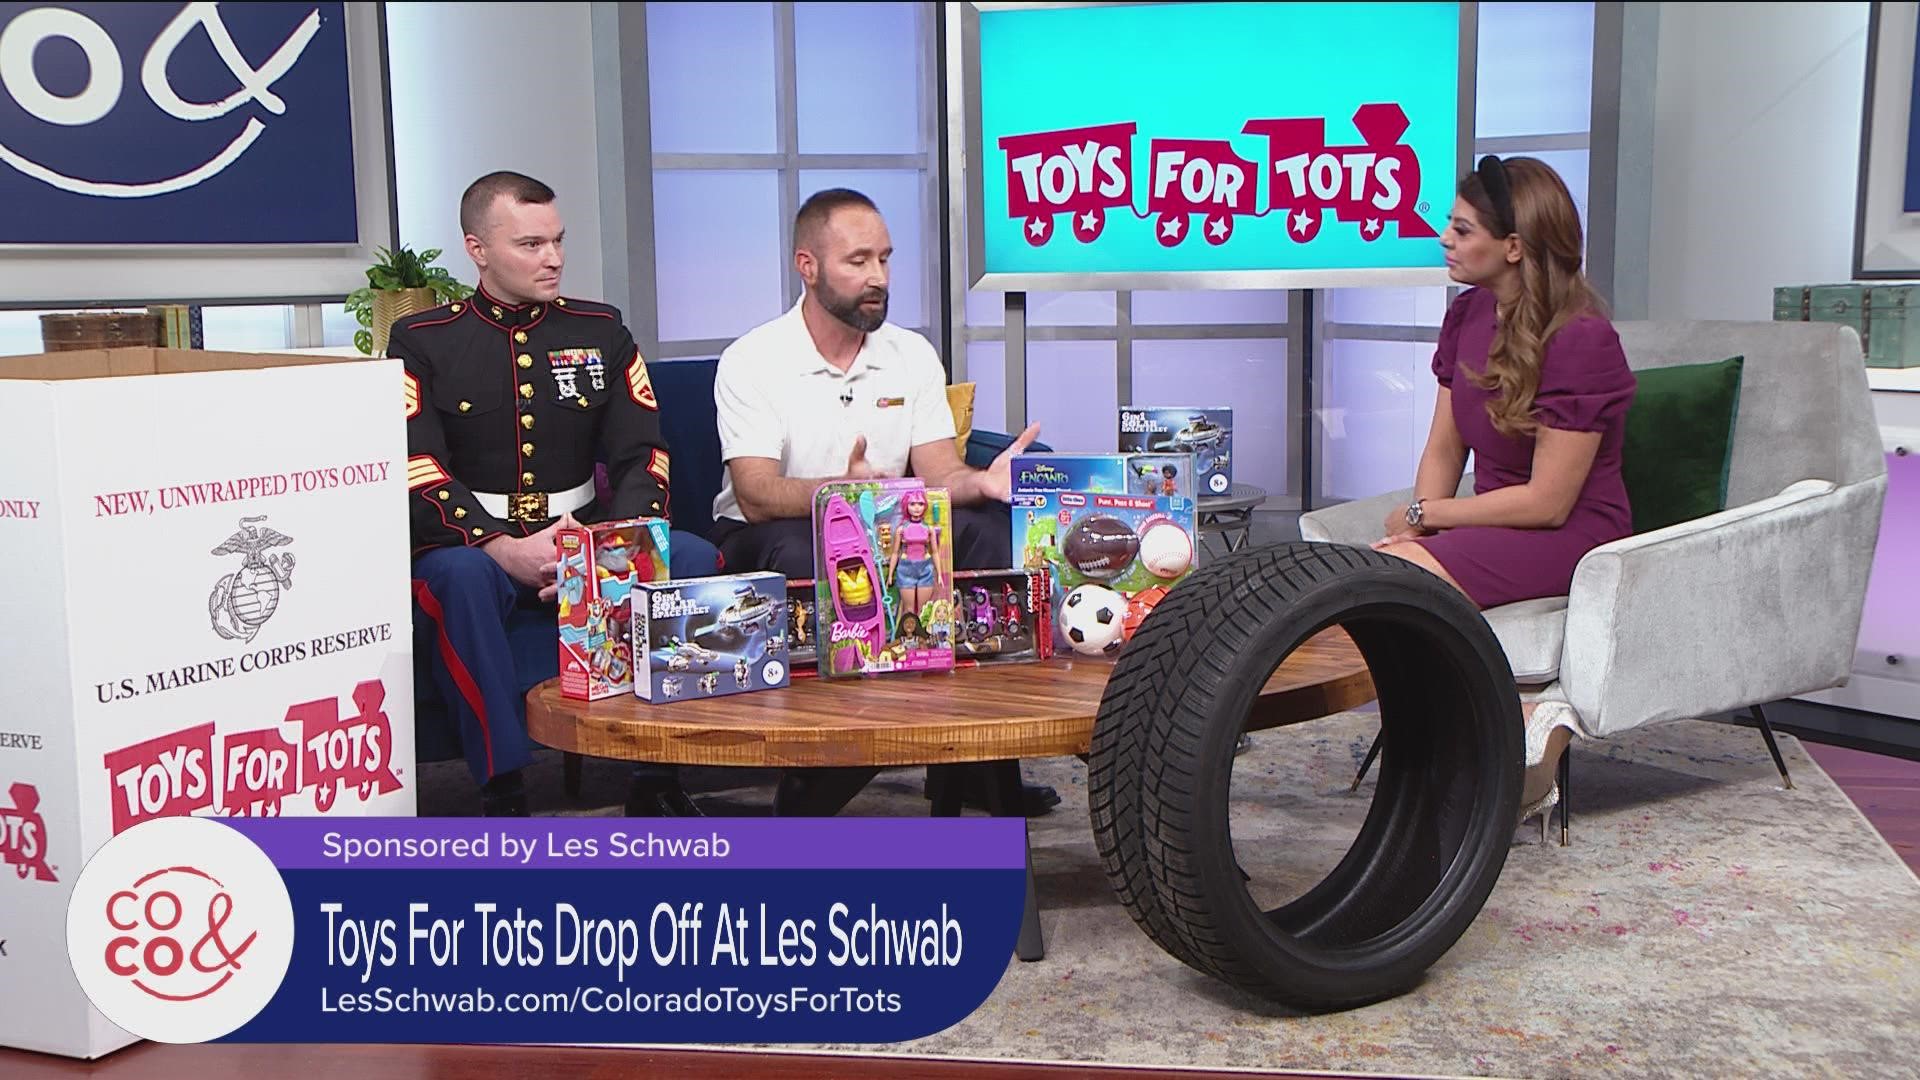 Drop off new/unwrapped toys at any CO Les Schwab location through December 10 to support Toys for Tots! Learn more: LesSchwab.com/ColoradoToysForTots. *PAID CONTENT*